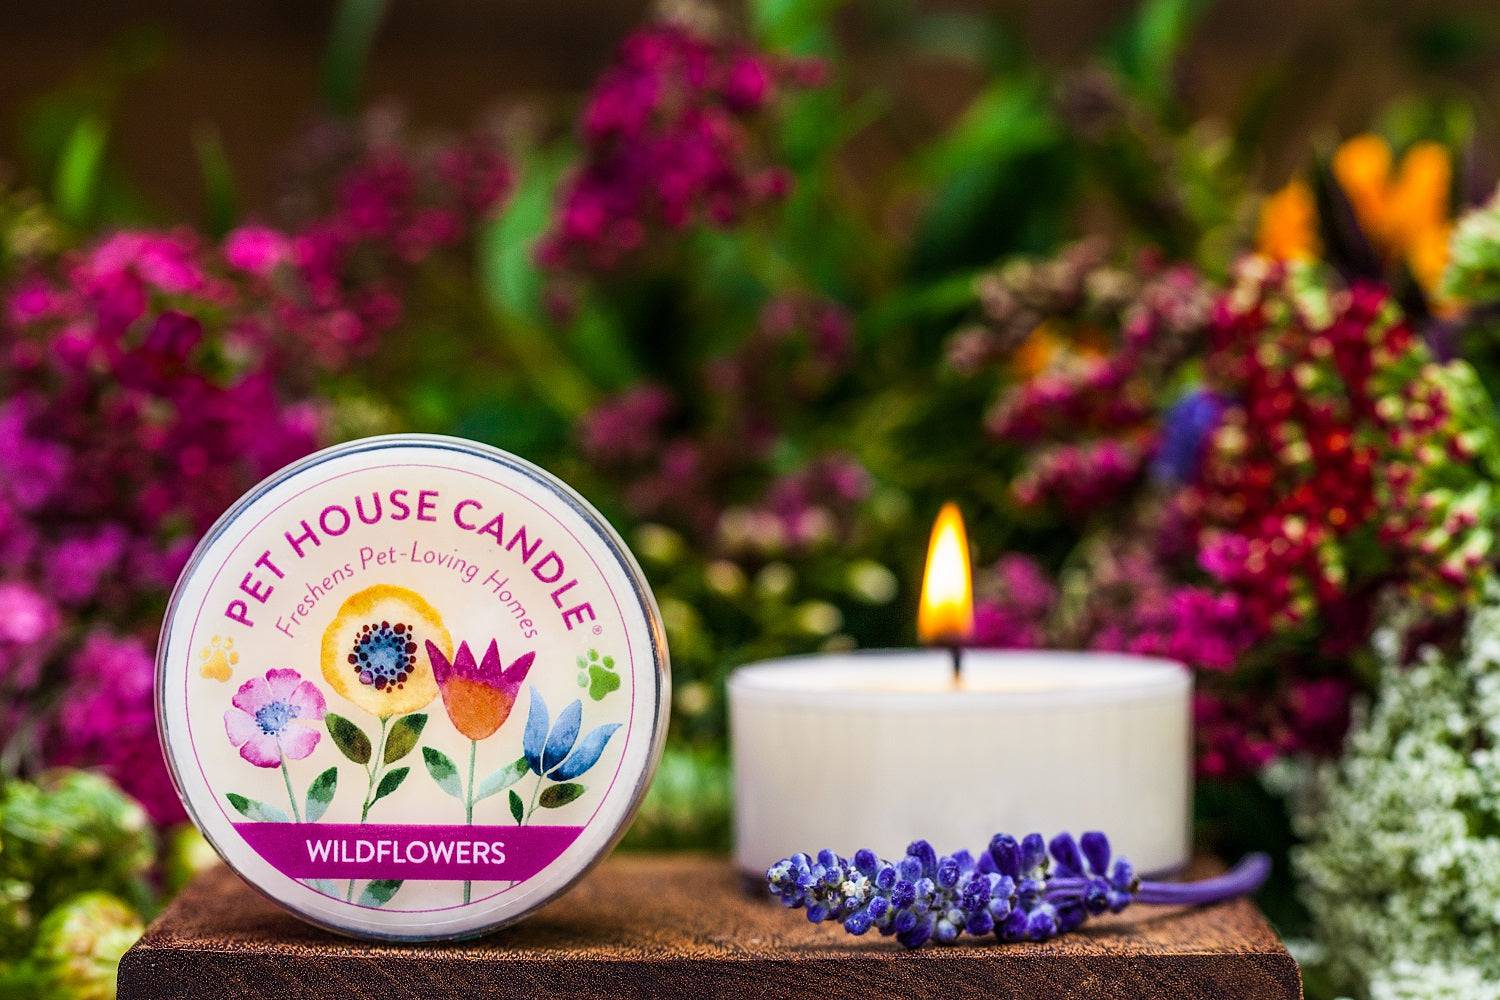 Wildflowers Mini Candle with wildflowers on the background